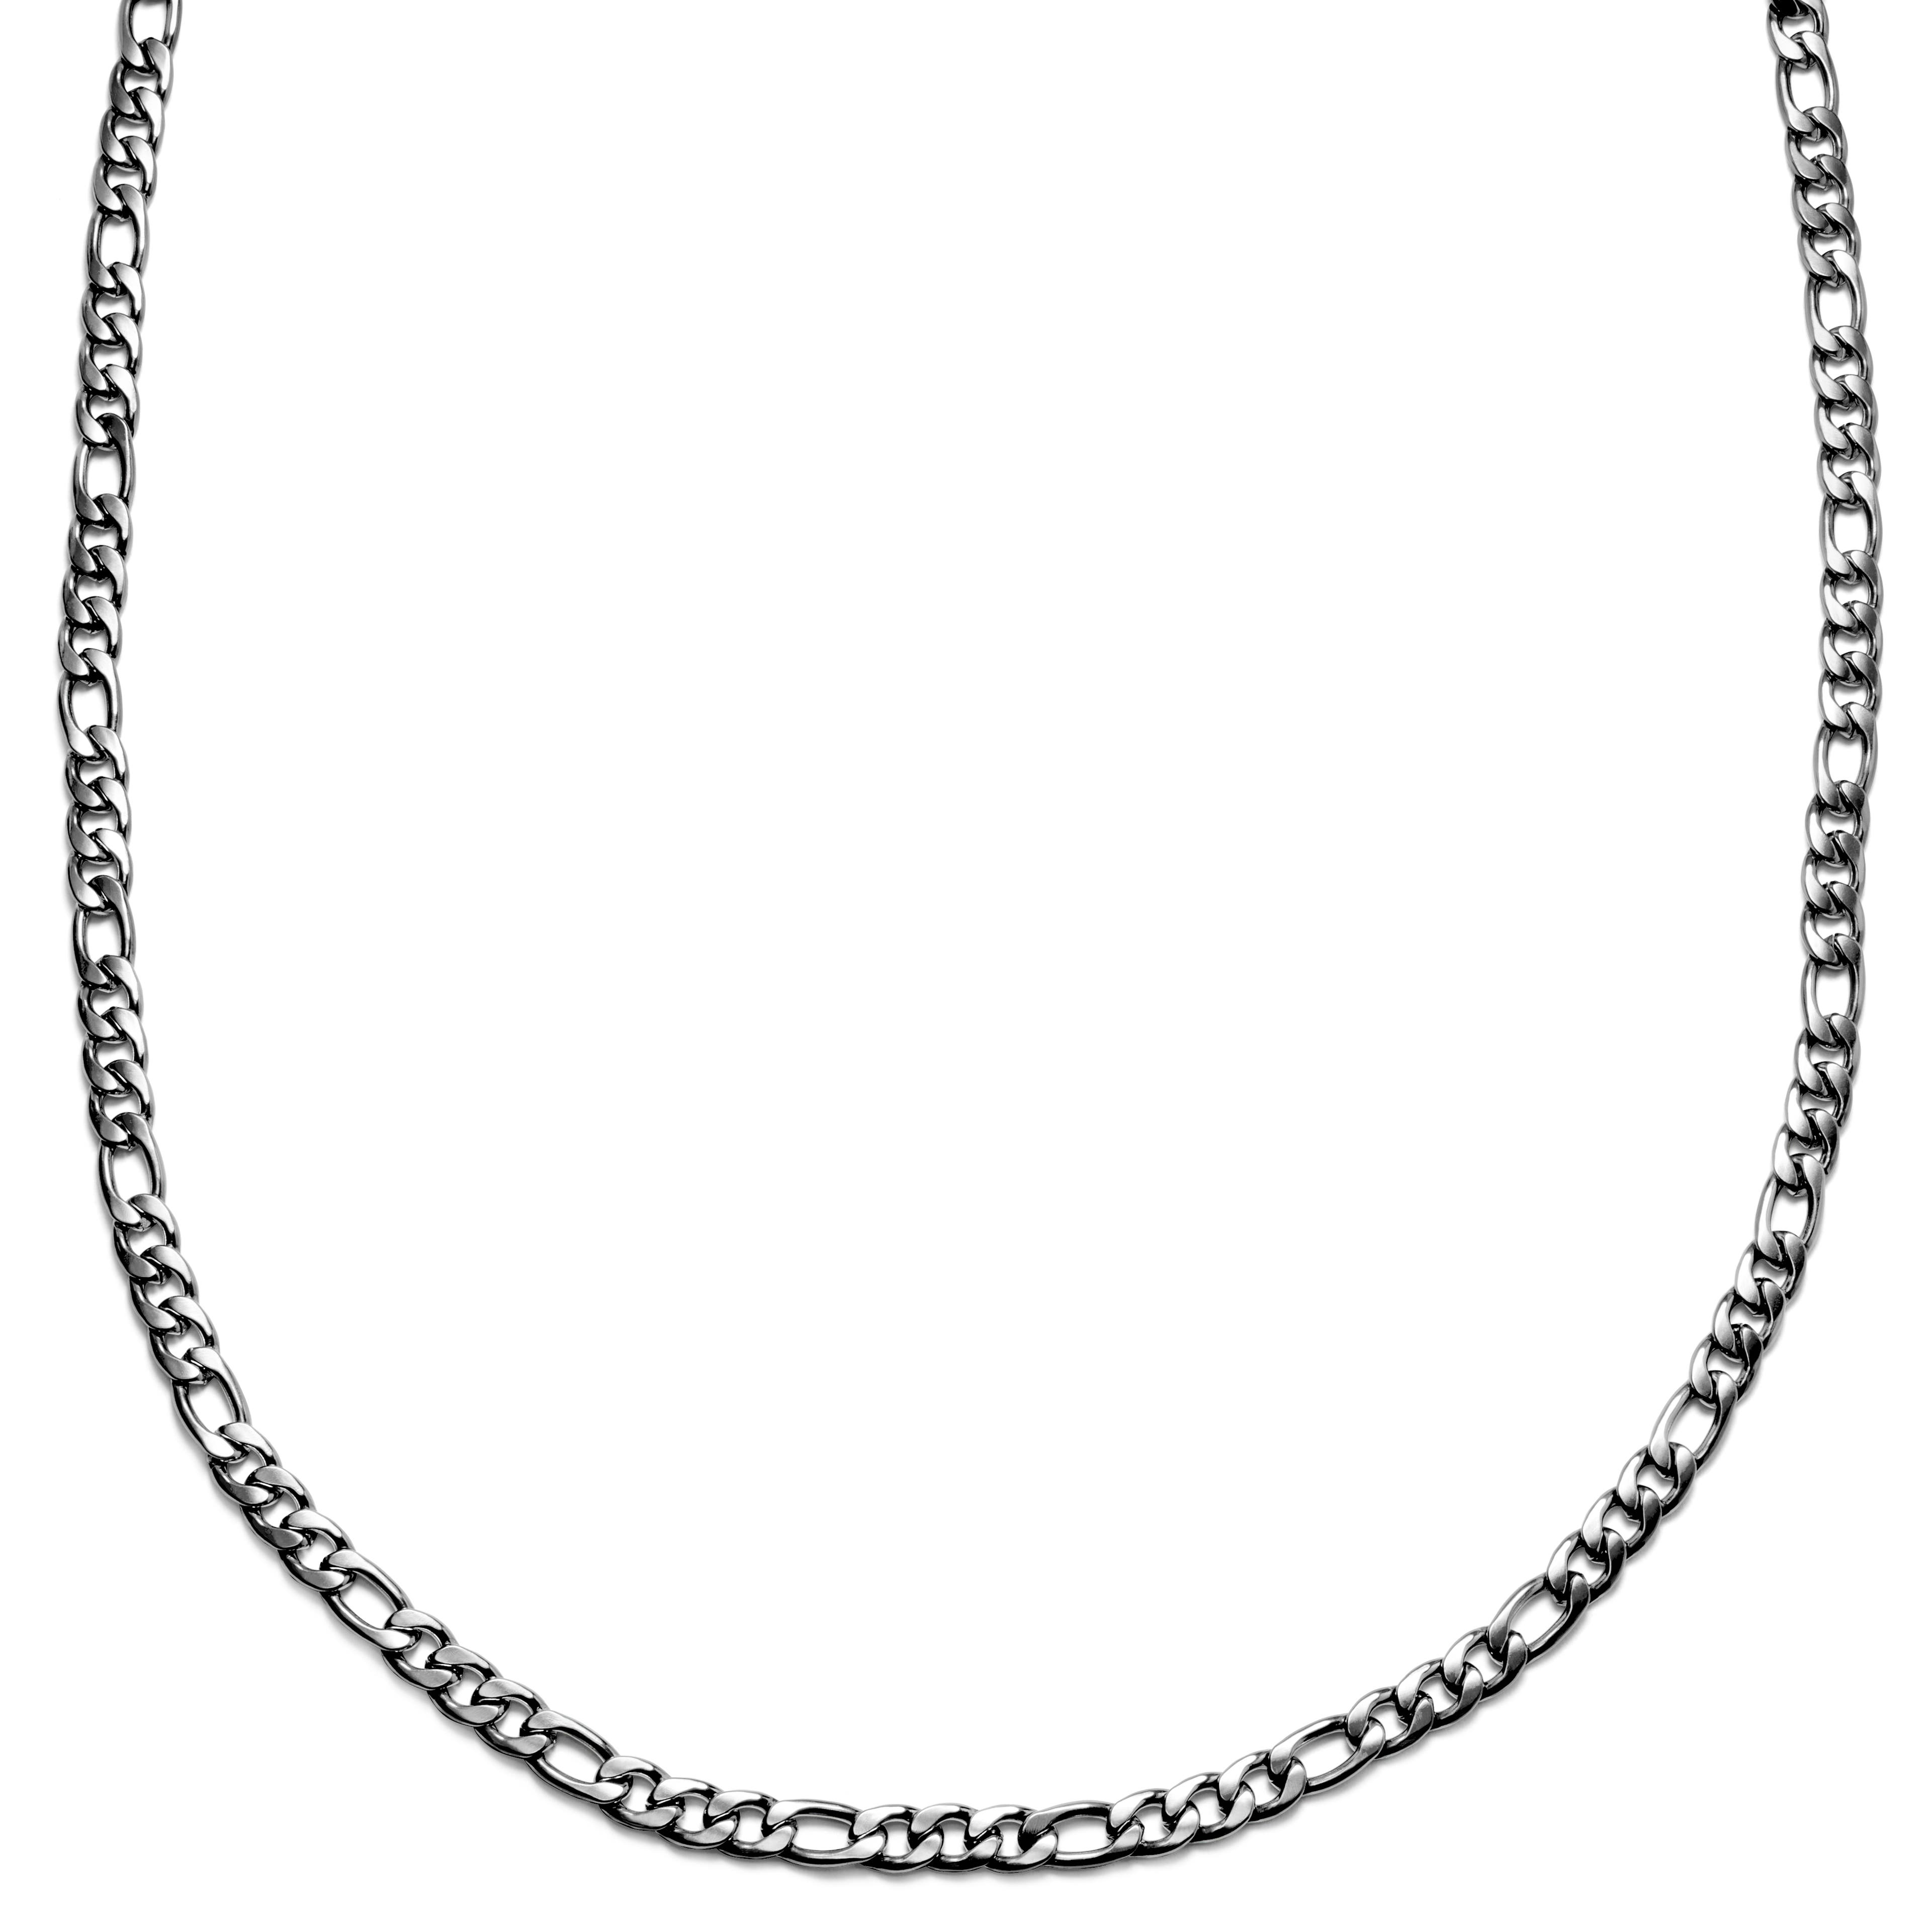 Curtis Amager Silver-Tone Figaro Chain Necklace